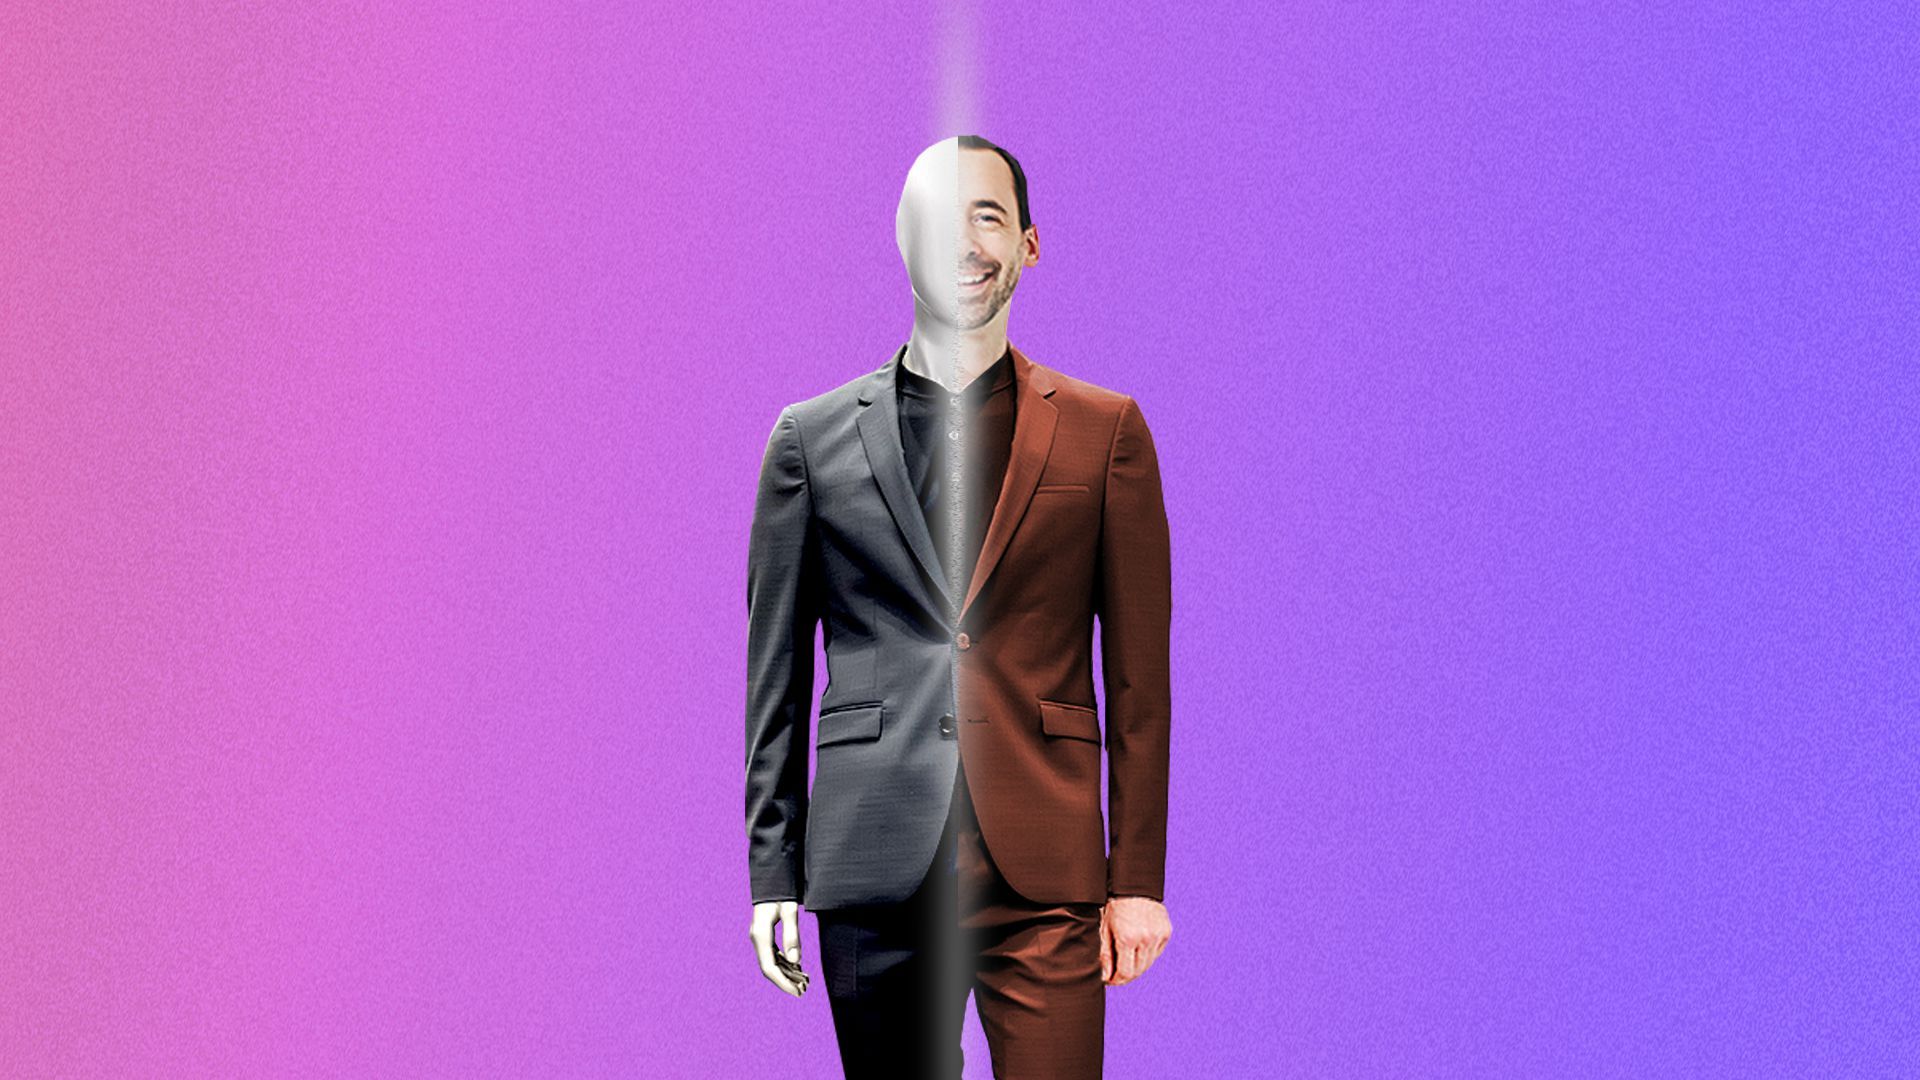 Illustration of a person who is half mannequin